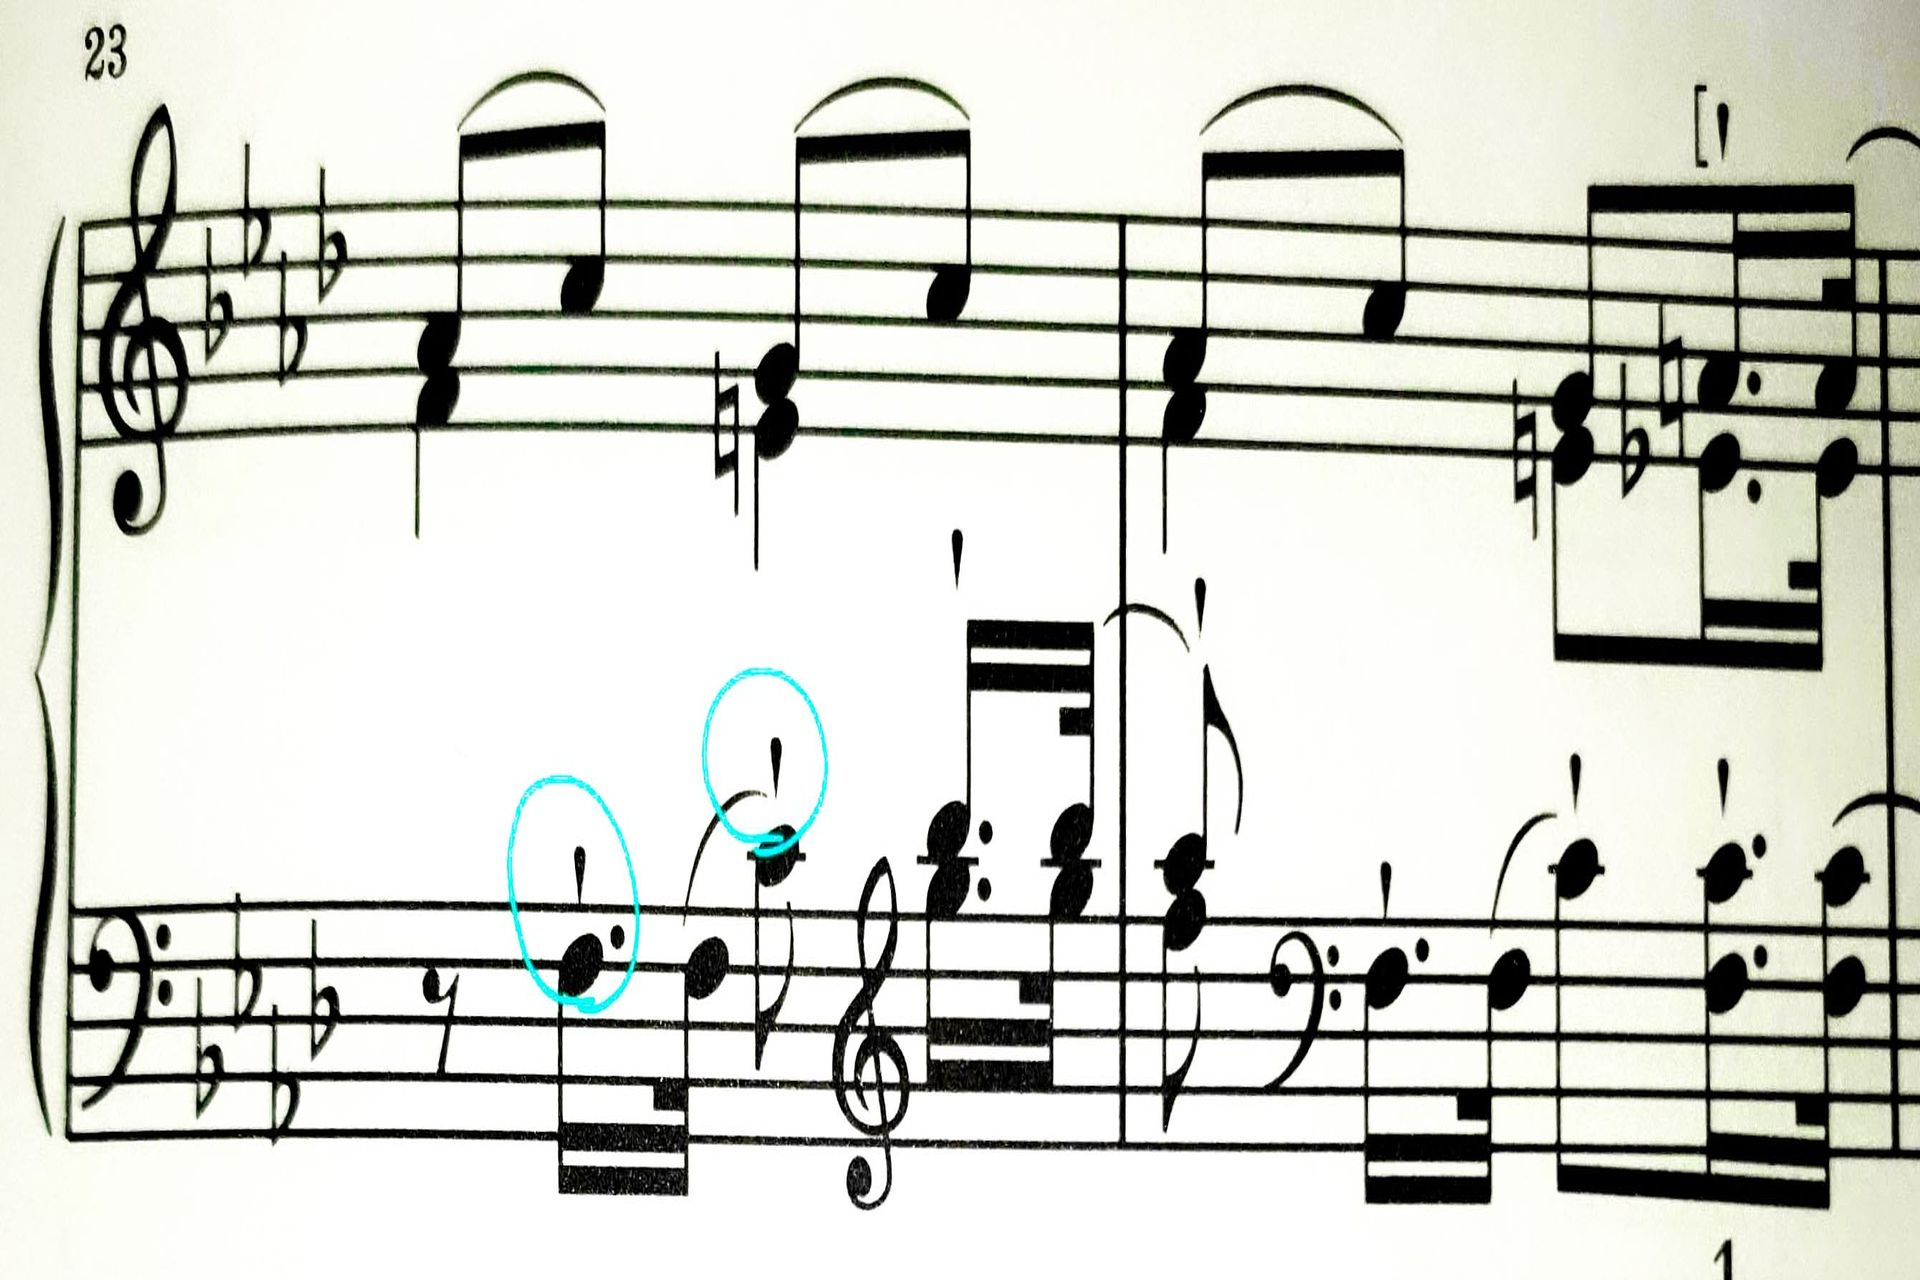 What Does It Mean When There Is An Arrow On Top Of A Note In Music